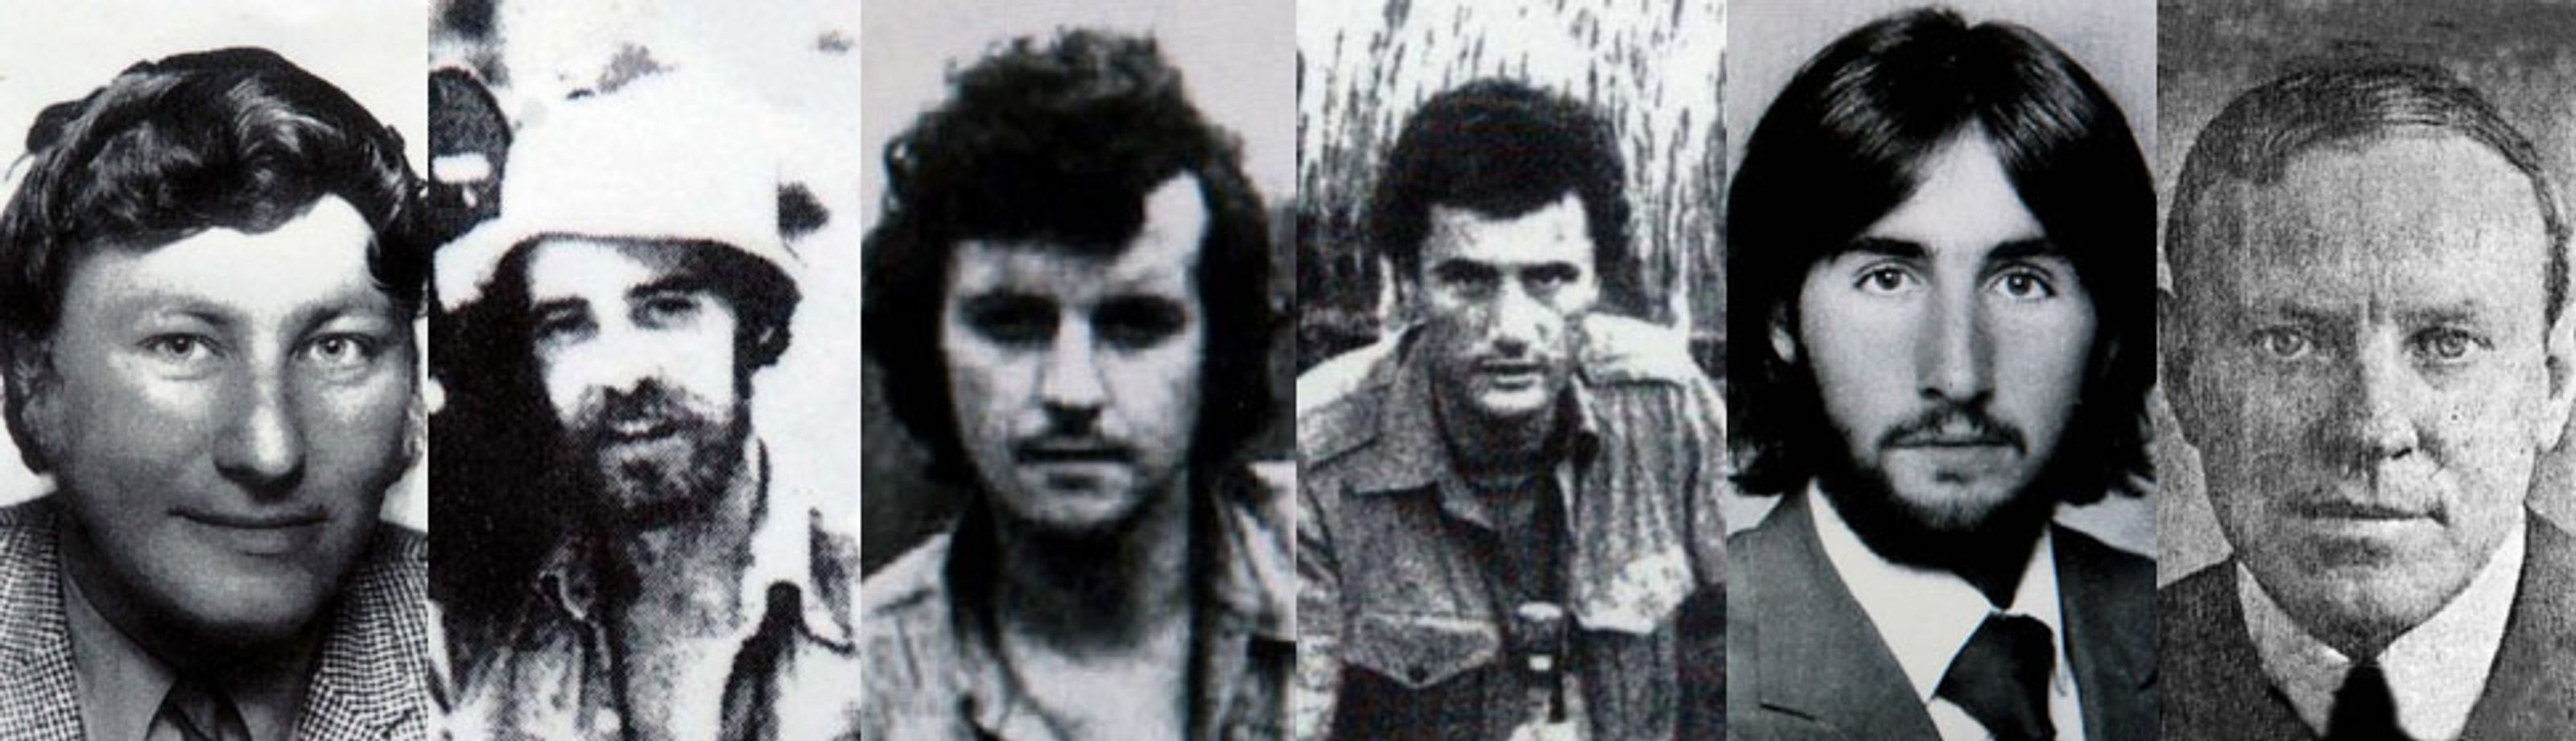 The six Australian journalists killed in East Timor in 1975: Gary Cunningham, Brian Peters, Malcolm Rennie, Greg Shackleton, Tony Stewart and Roger East.